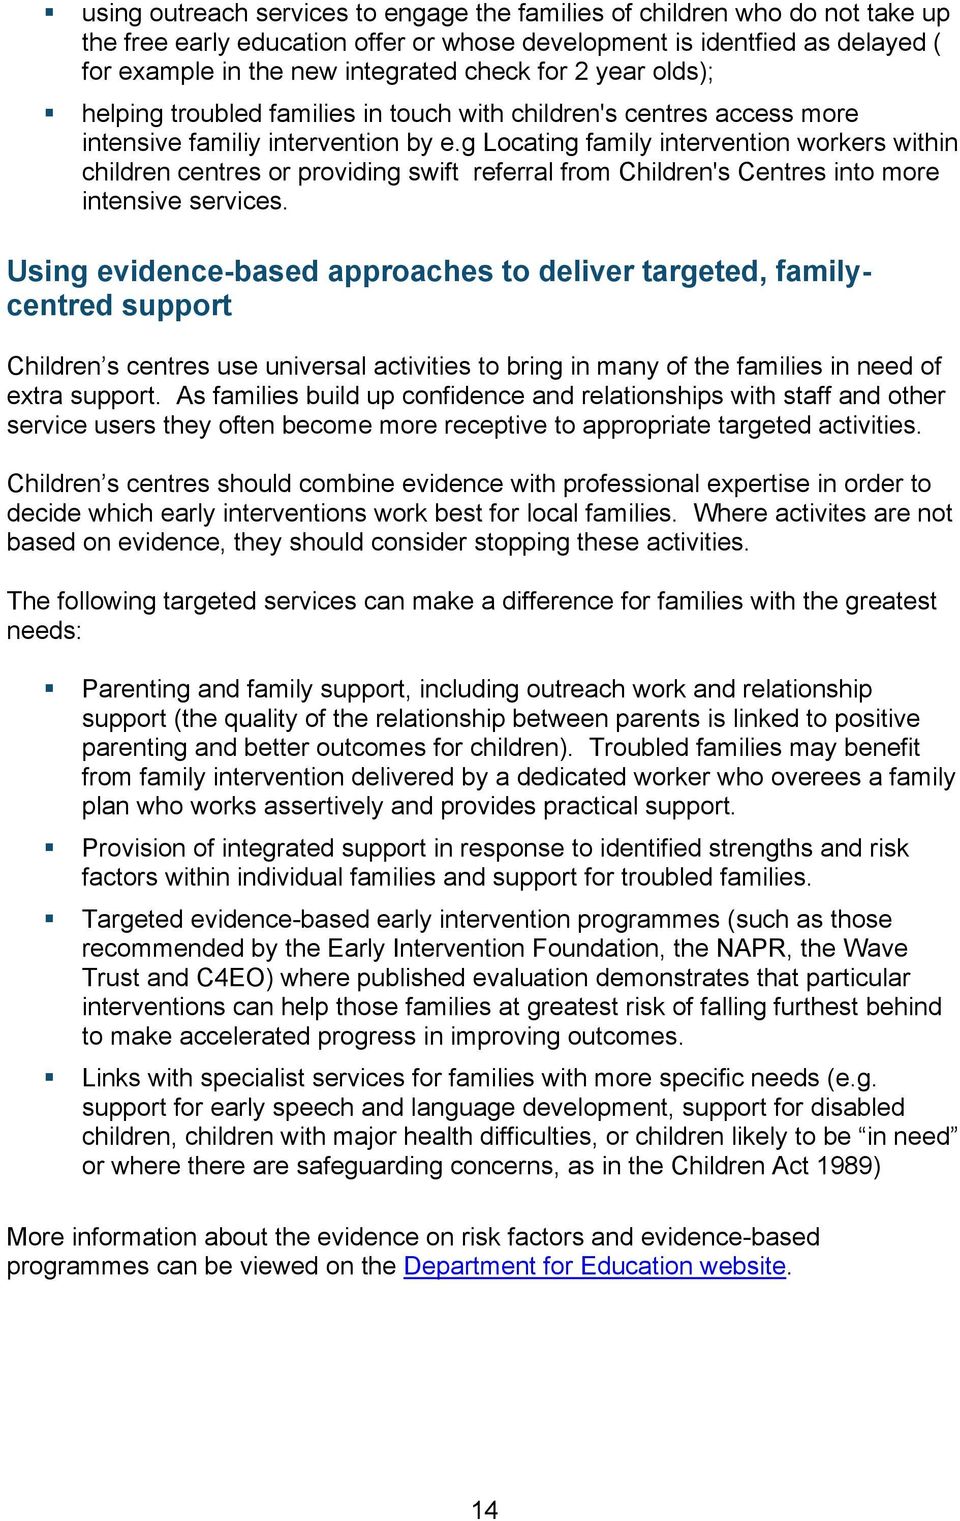 g Locating family intervention workers within children centres or providing swift referral from Children's Centres into more intensive services.